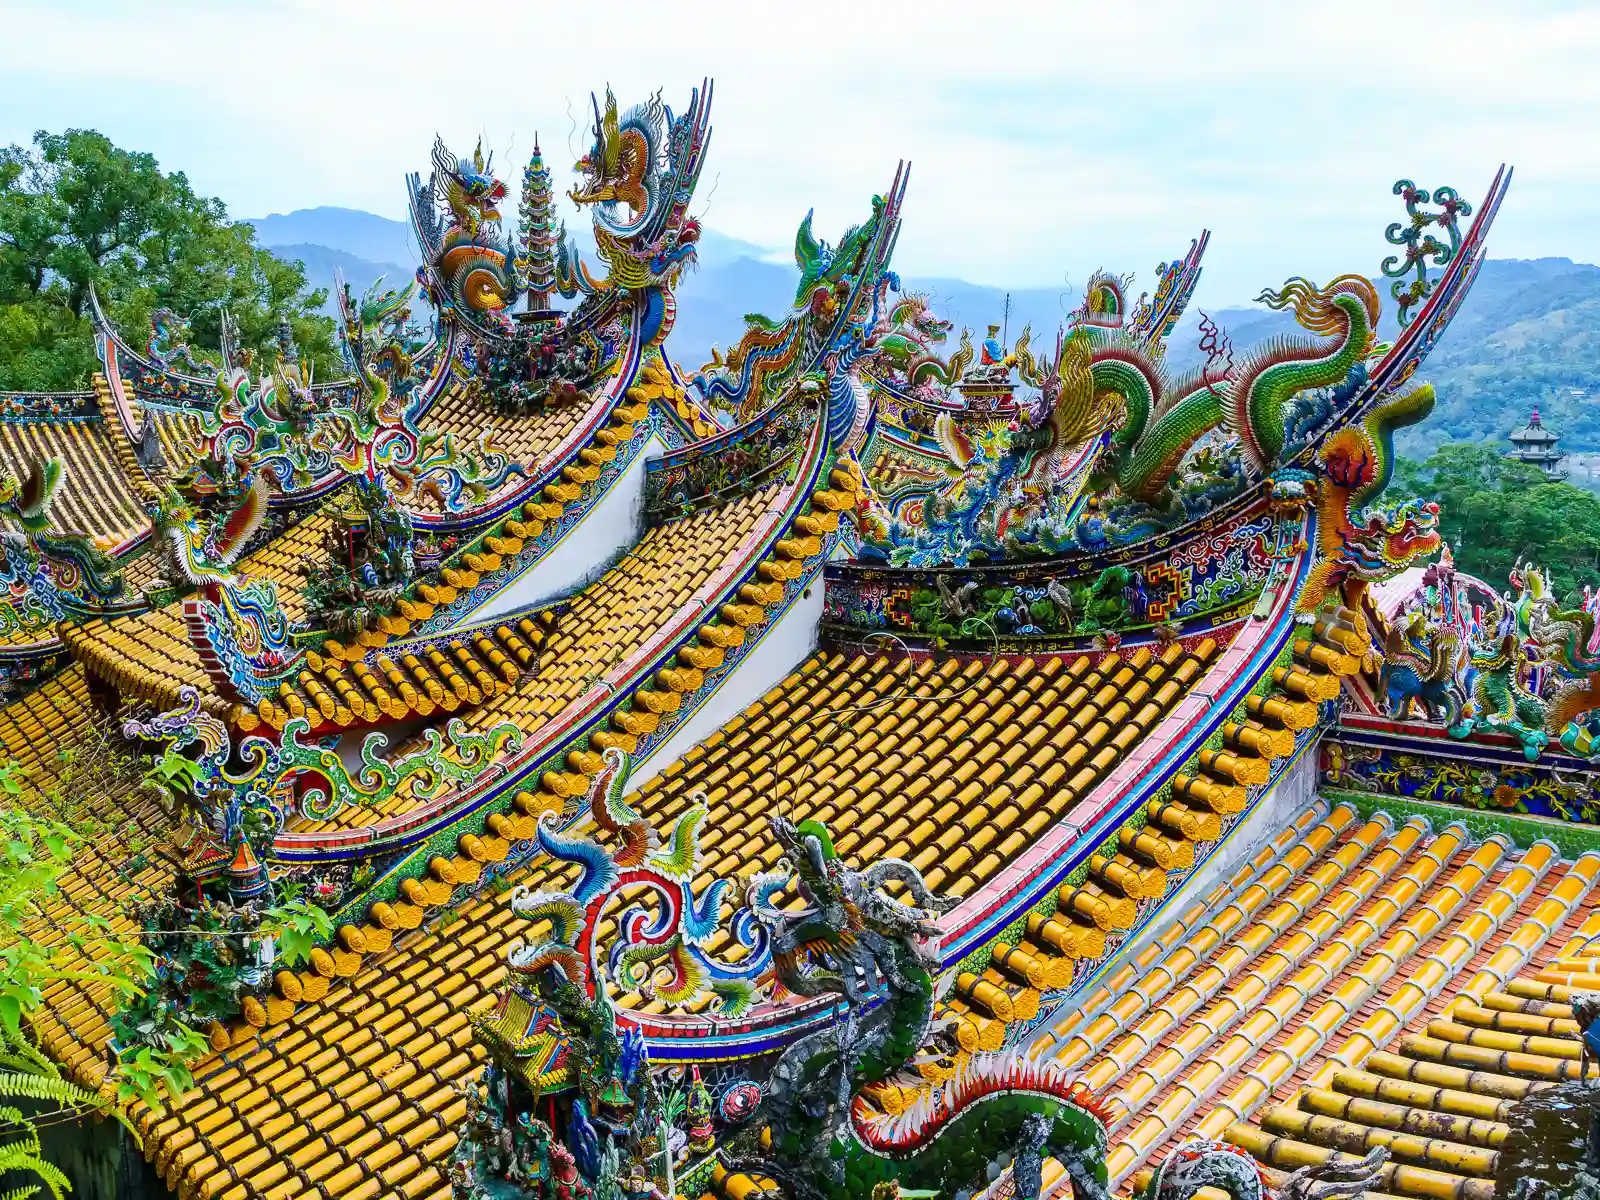 The top of the main hall of Quanhua Temples features elaborate dragon carvings.